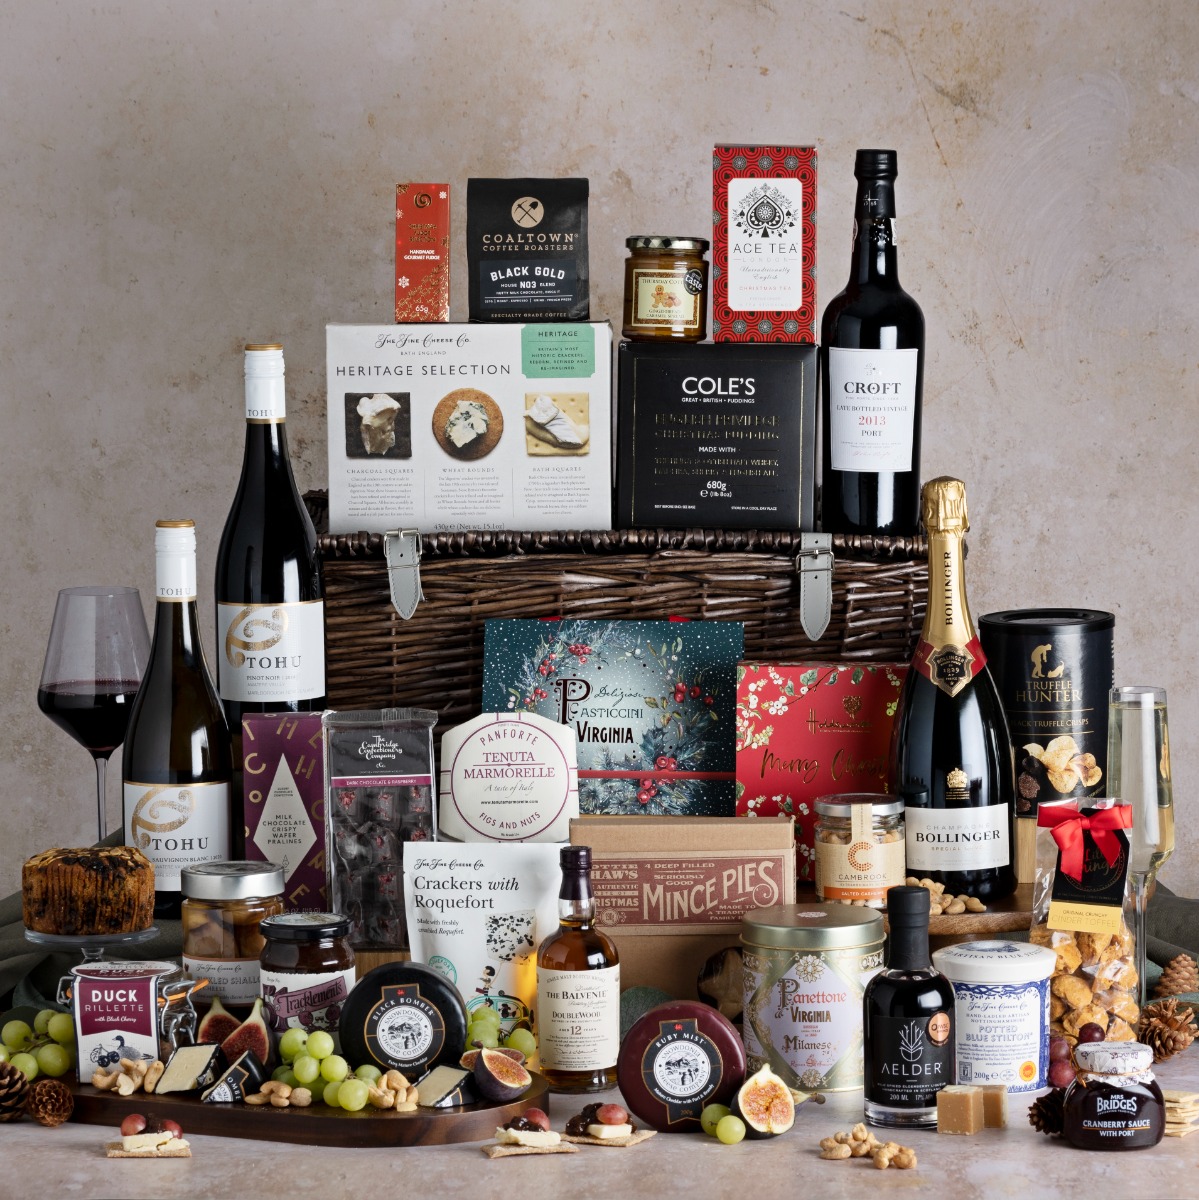  The Magnificent Christmas Hamper with all of its contents on display